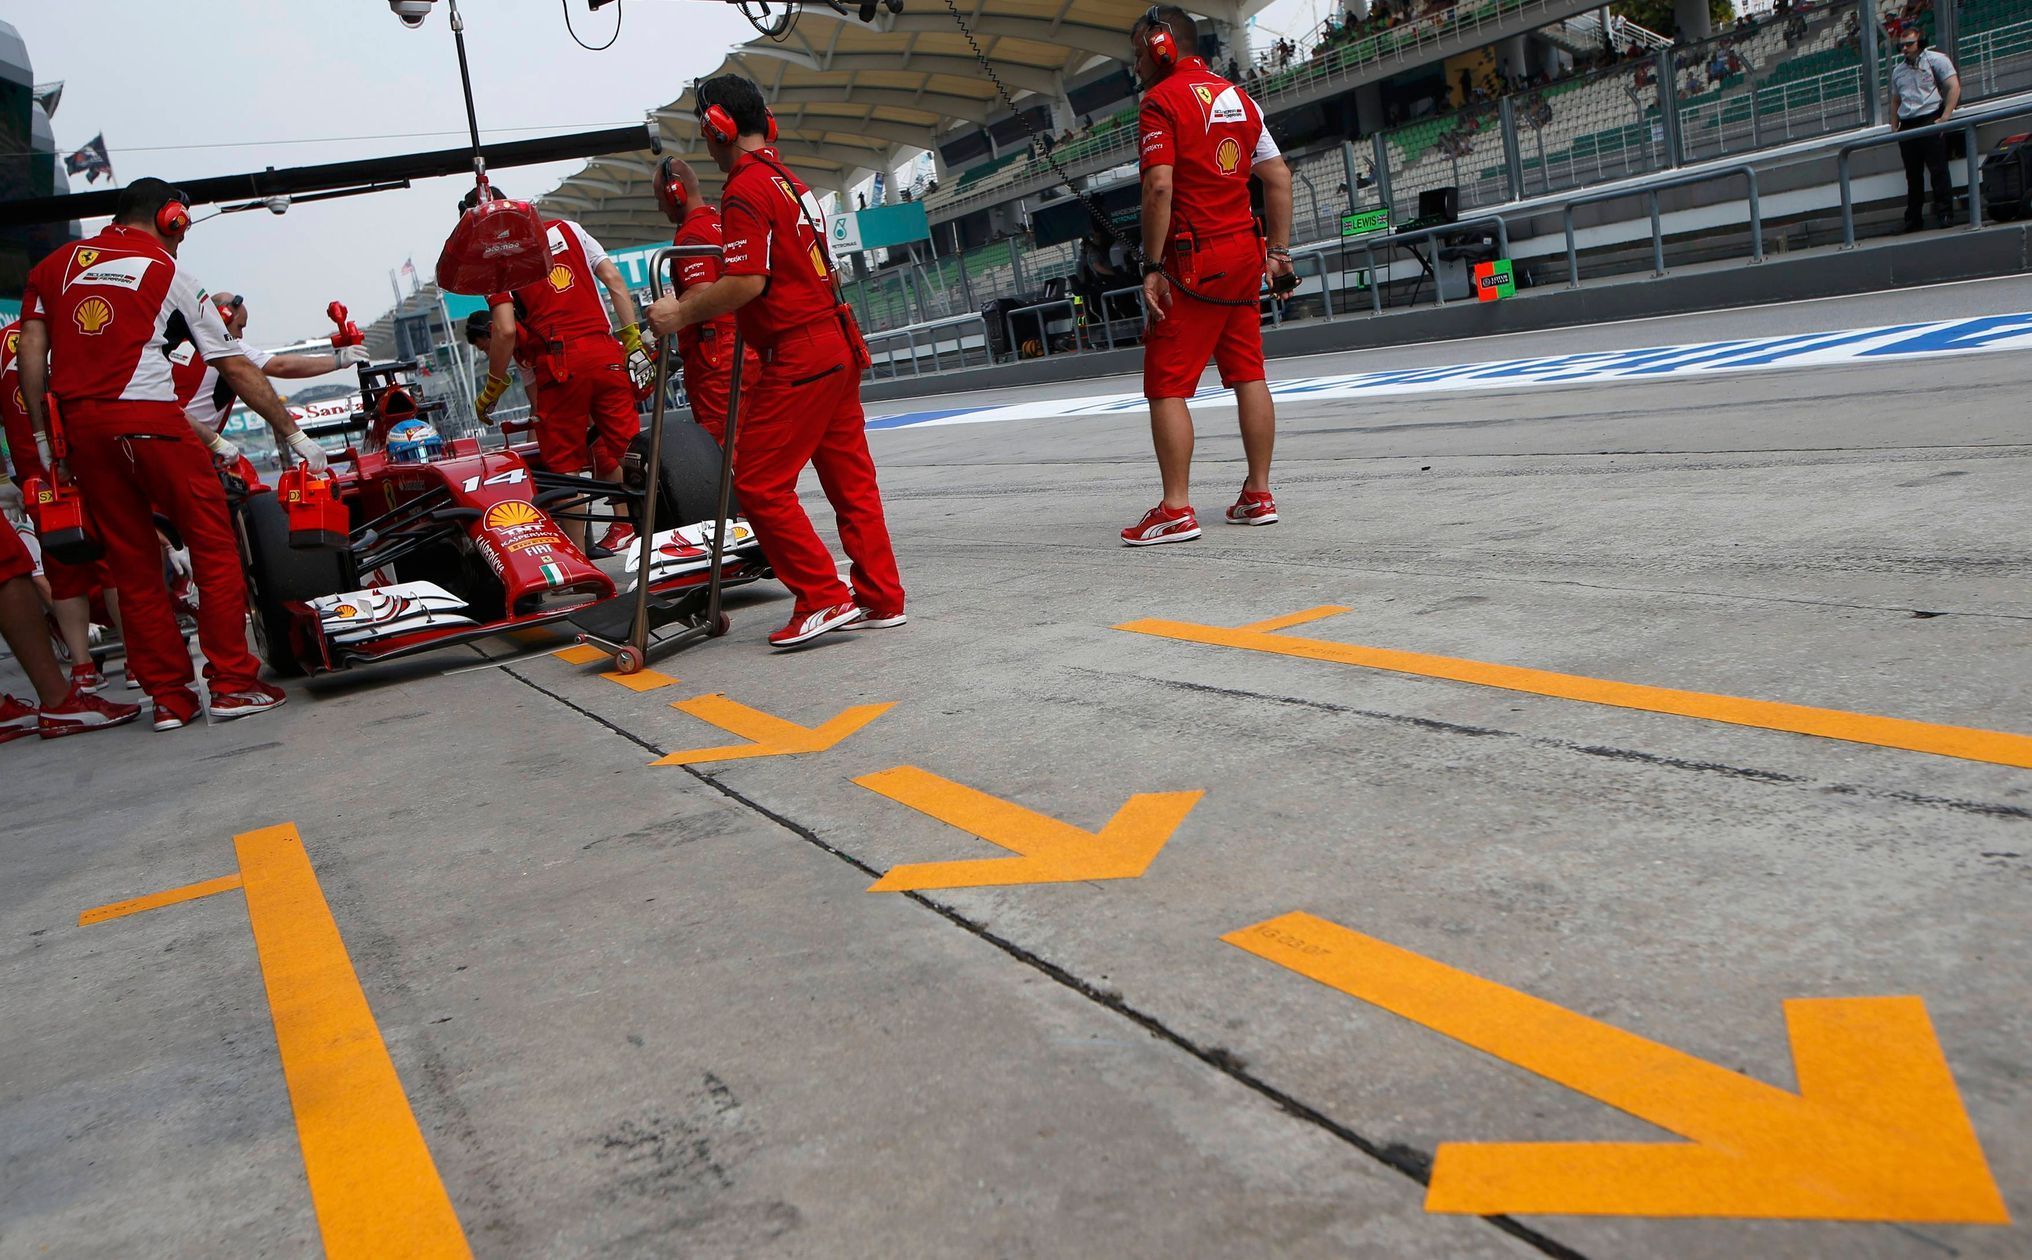 Ferrari Formula One driver Alonso of Spain pits during the second practice session of the Malaysian F1 Grand Prix at Sepang International Circuit outside Kuala Lumpur